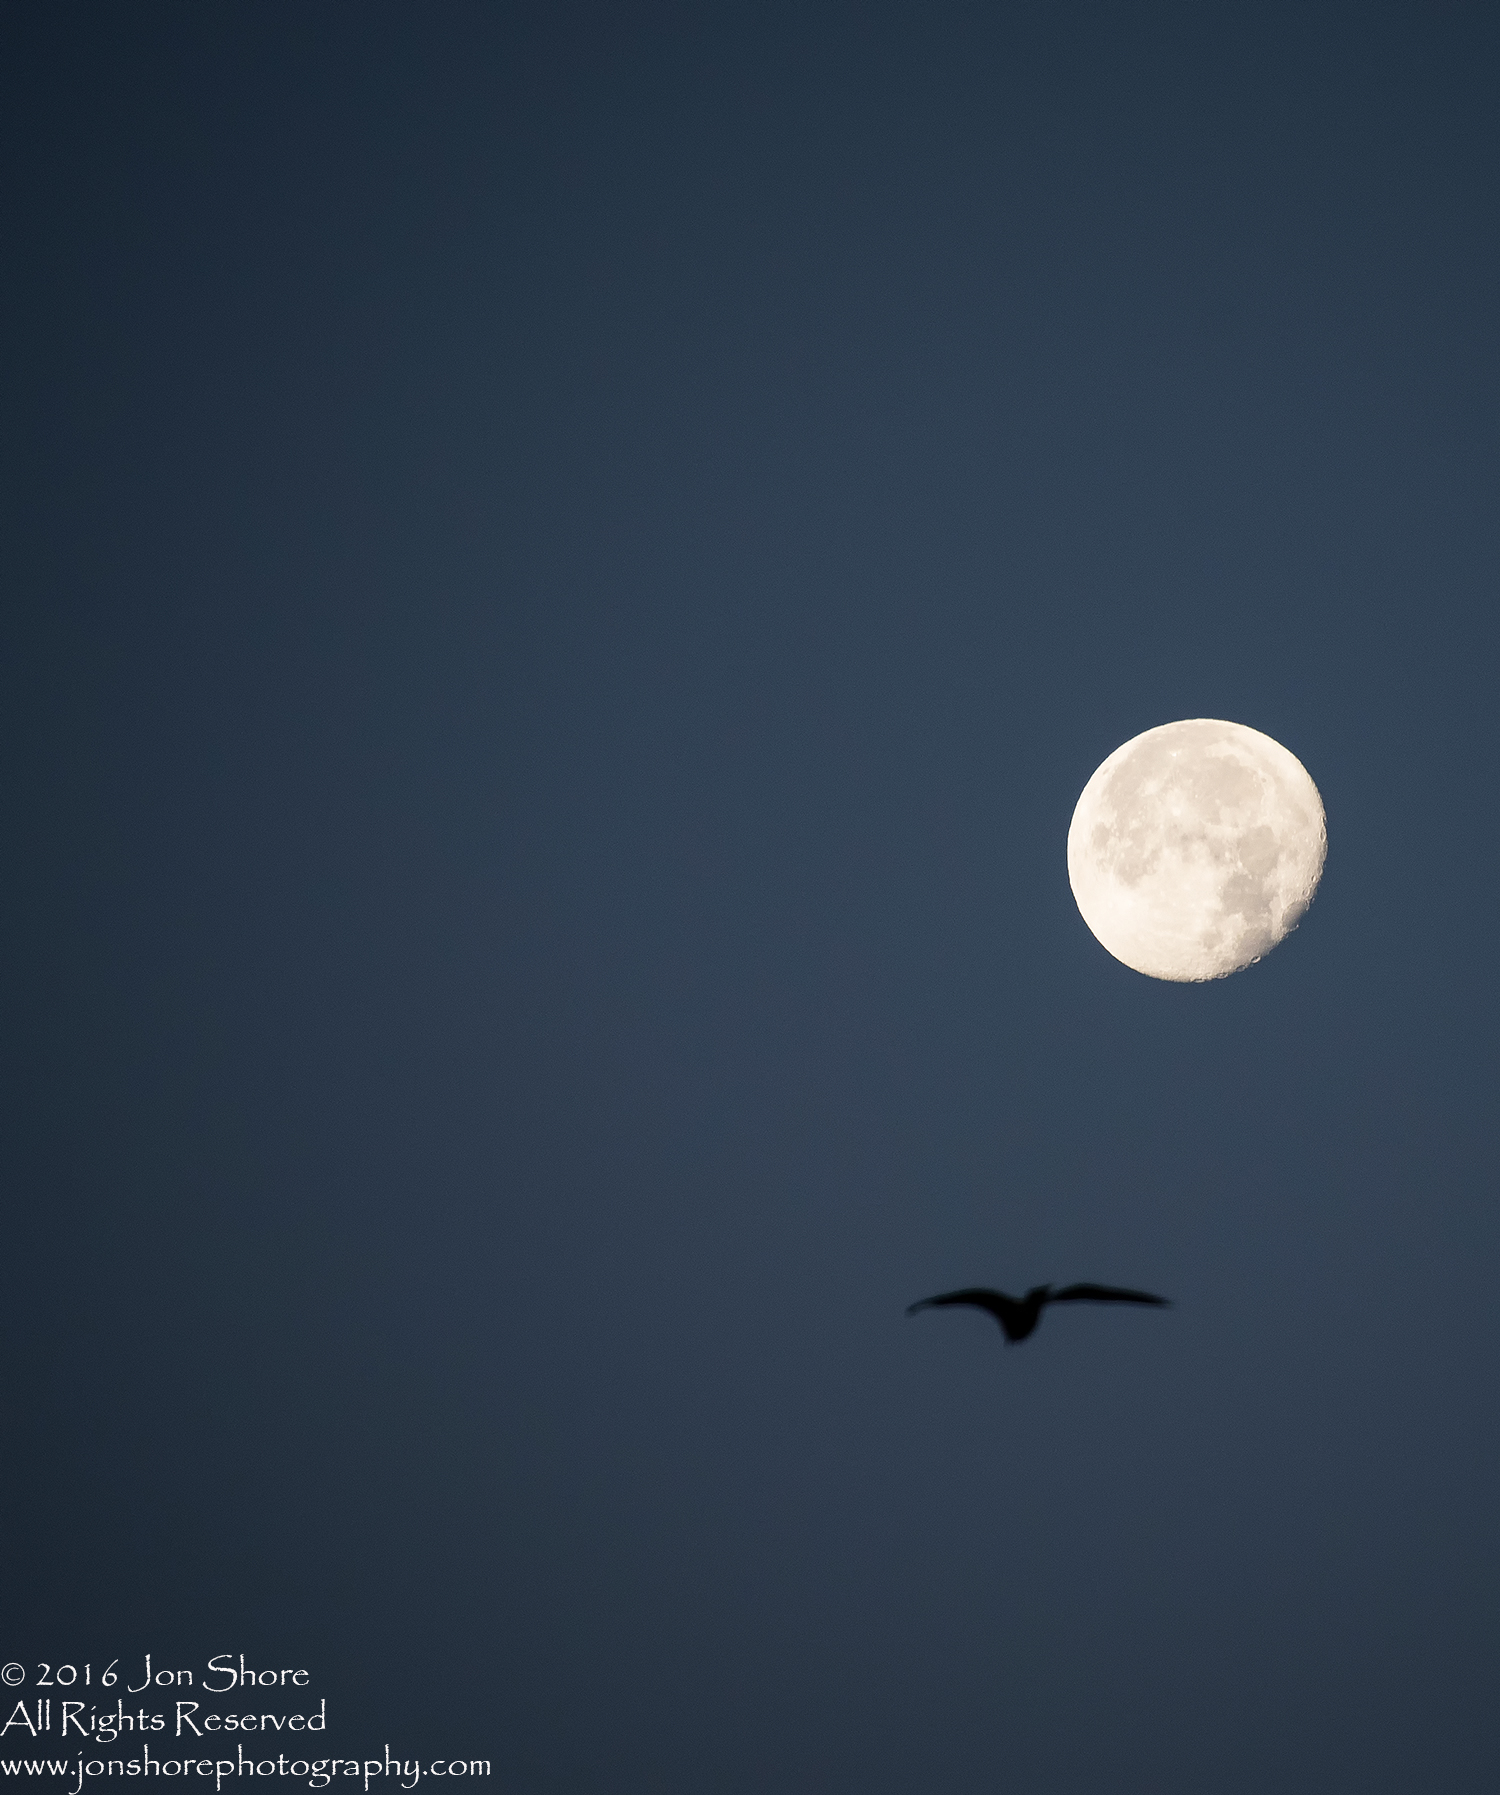 Moon and Gull. Nikkor 300mm